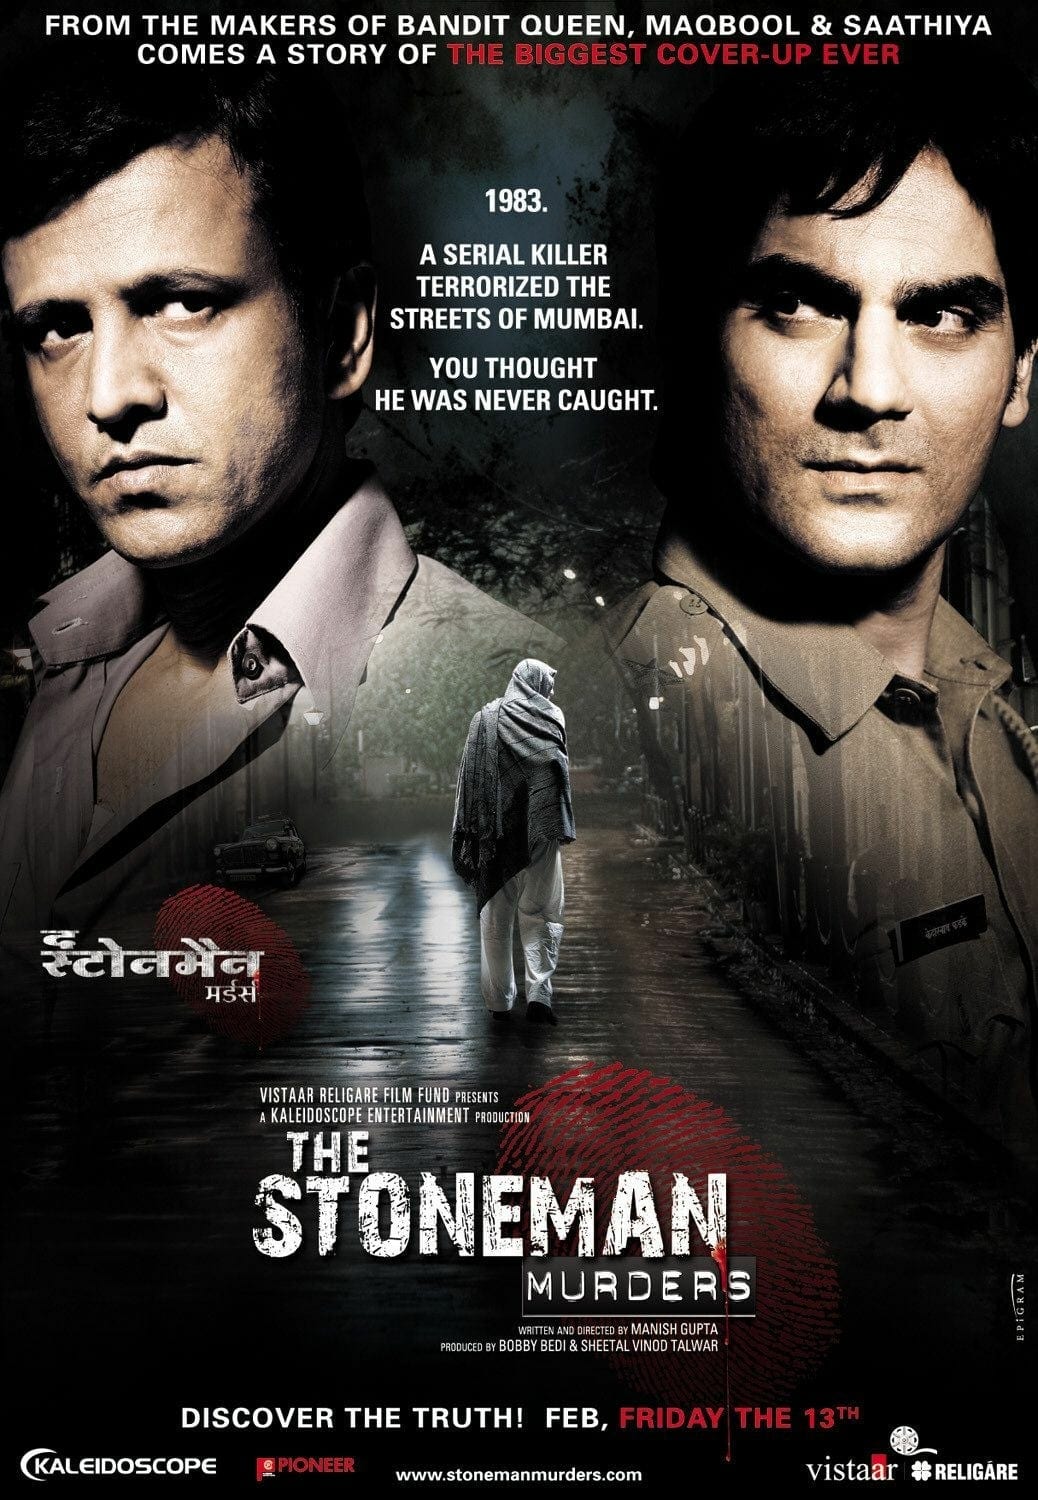 Poster for the movie "The Stoneman Murders"